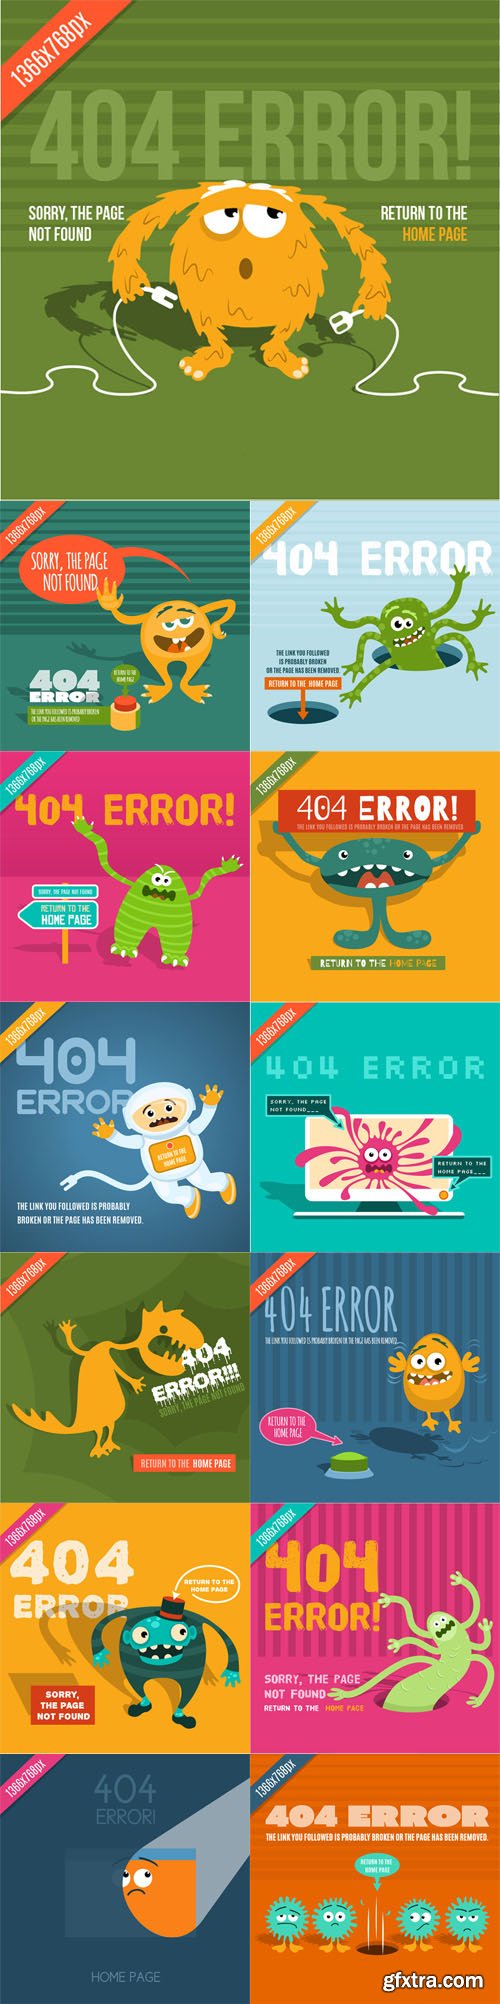 404 Error Page Vector Template Collection